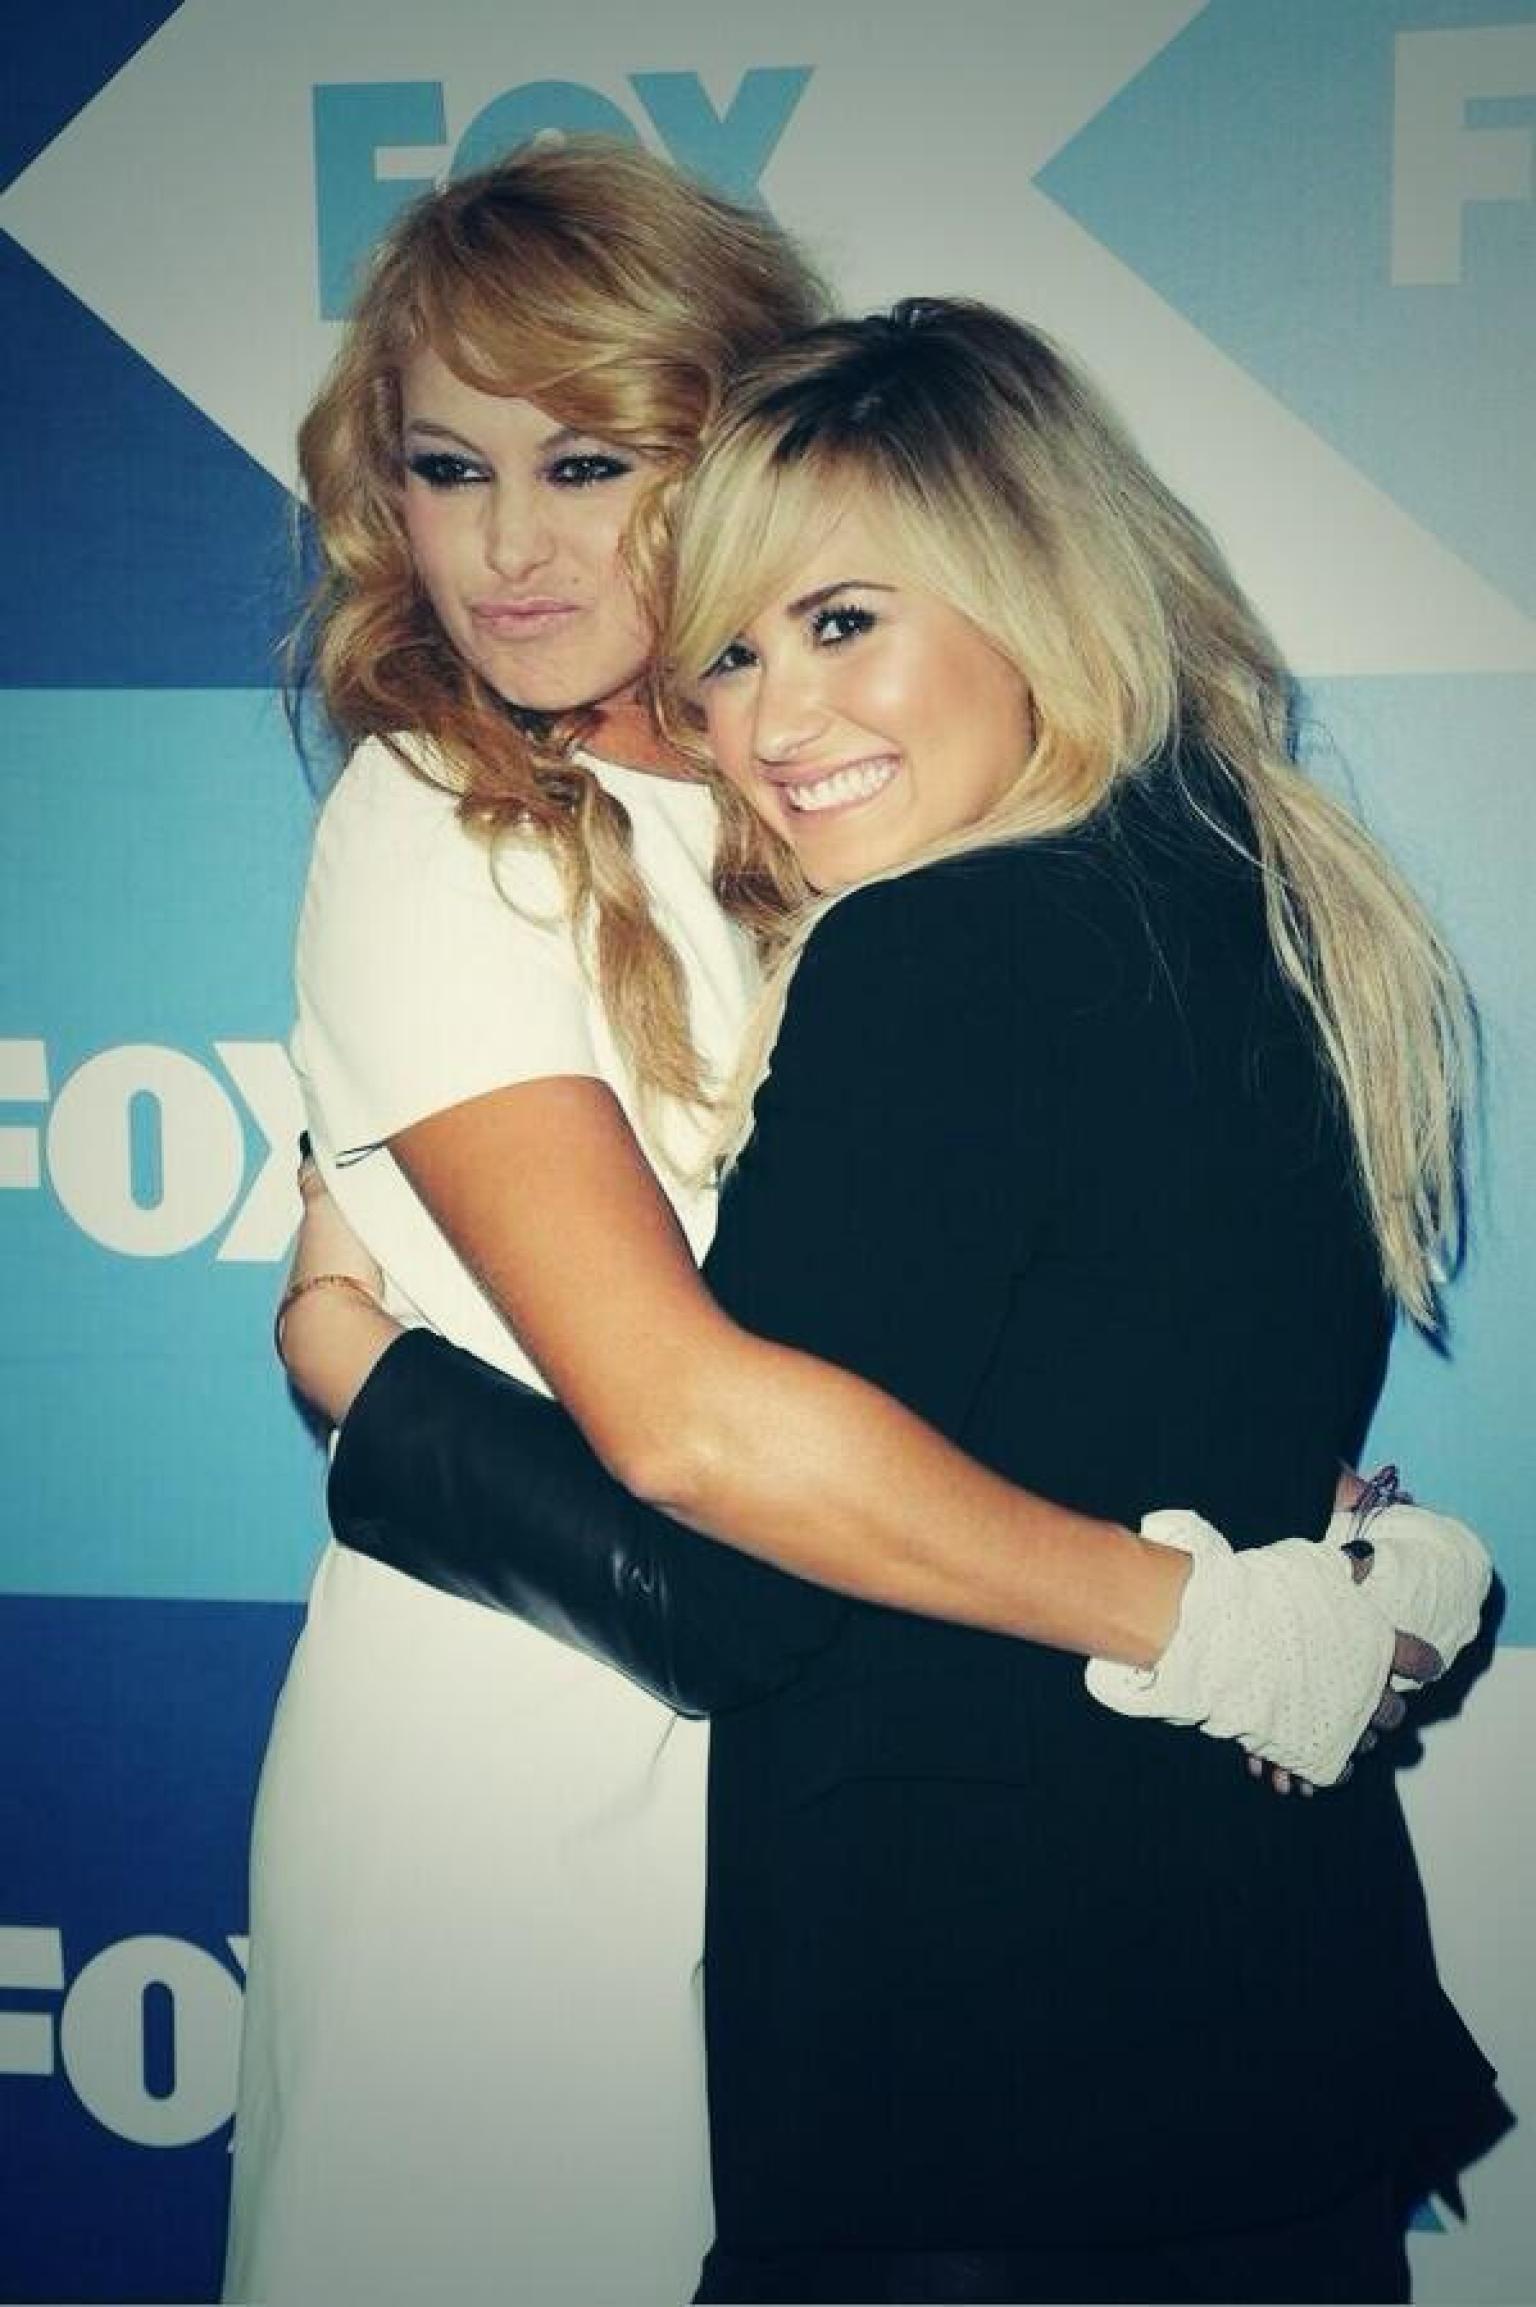 Demi Lovato, Paulina Rubio Build Strong Friendship Behind The Scenes Of 'The X Factor ...1536 x 2307